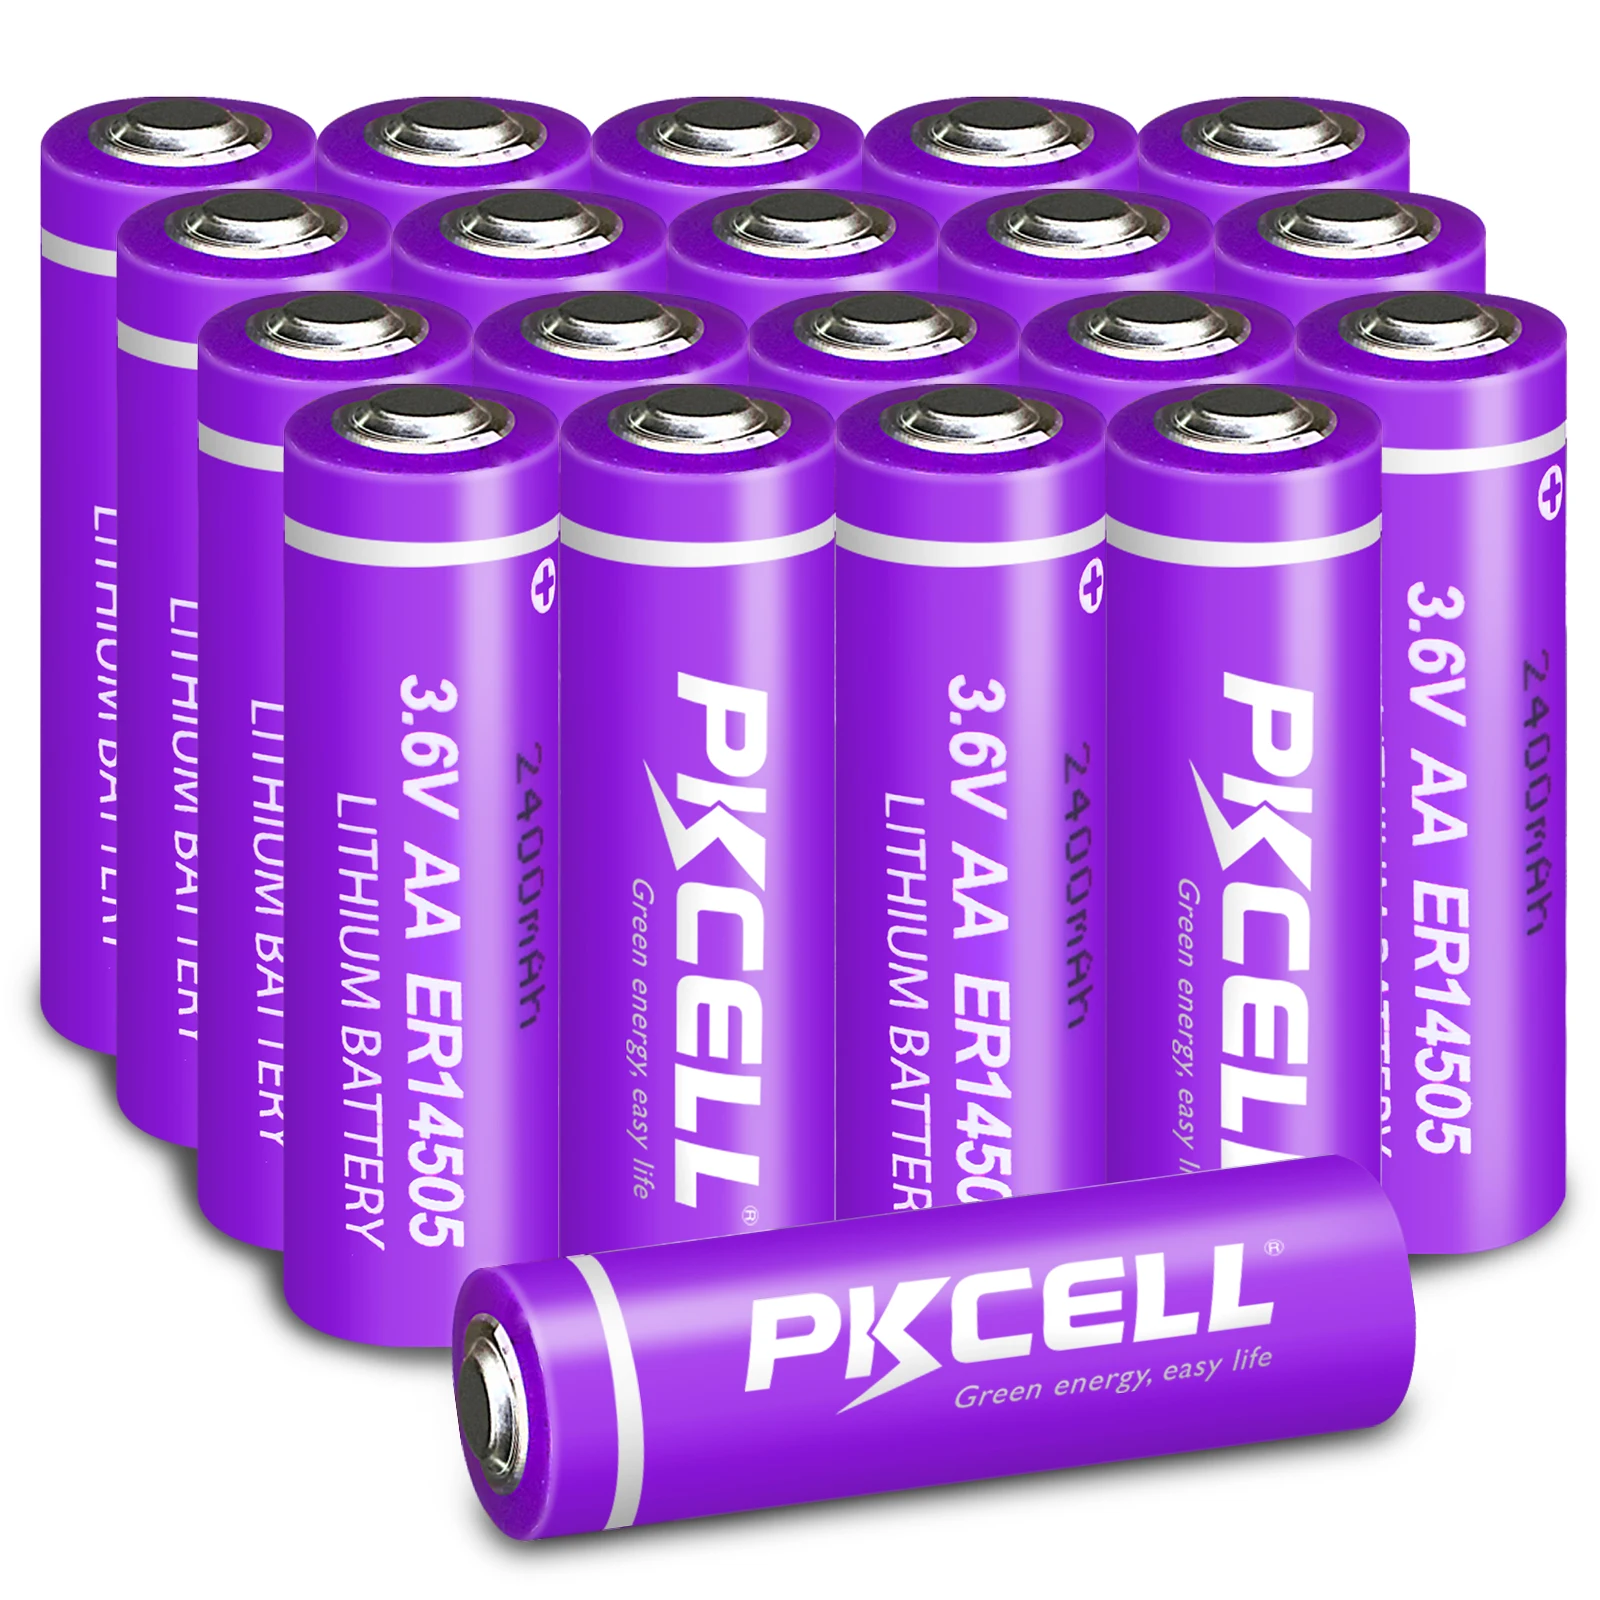 

20PCS PKCELL ER14505 AA battery AA lithium Batteries Superior LR6 R6P 14505 2400mah Primary battari For Smart ,water ,gas meter